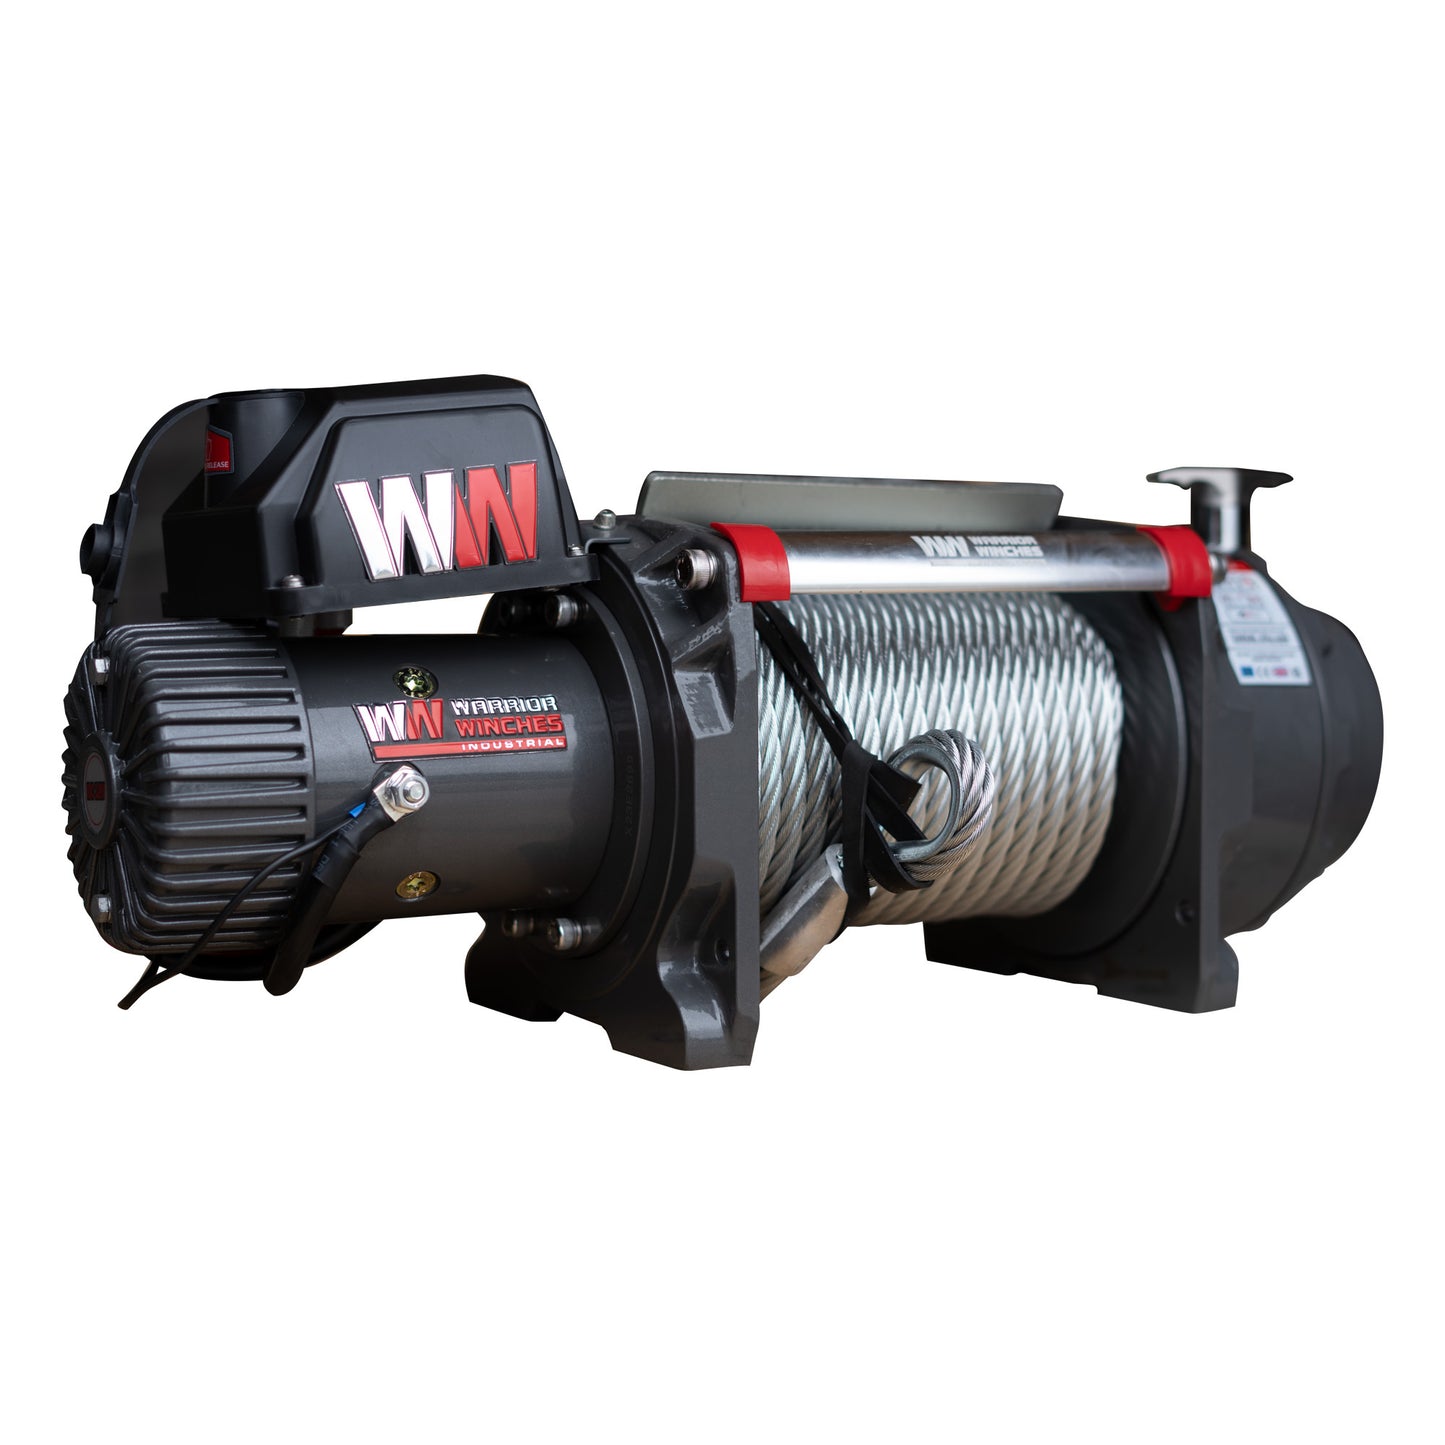 Warrior Samurai 17,500lb 12v Electric Winch - Industrial - The Trailer Parts Outlet